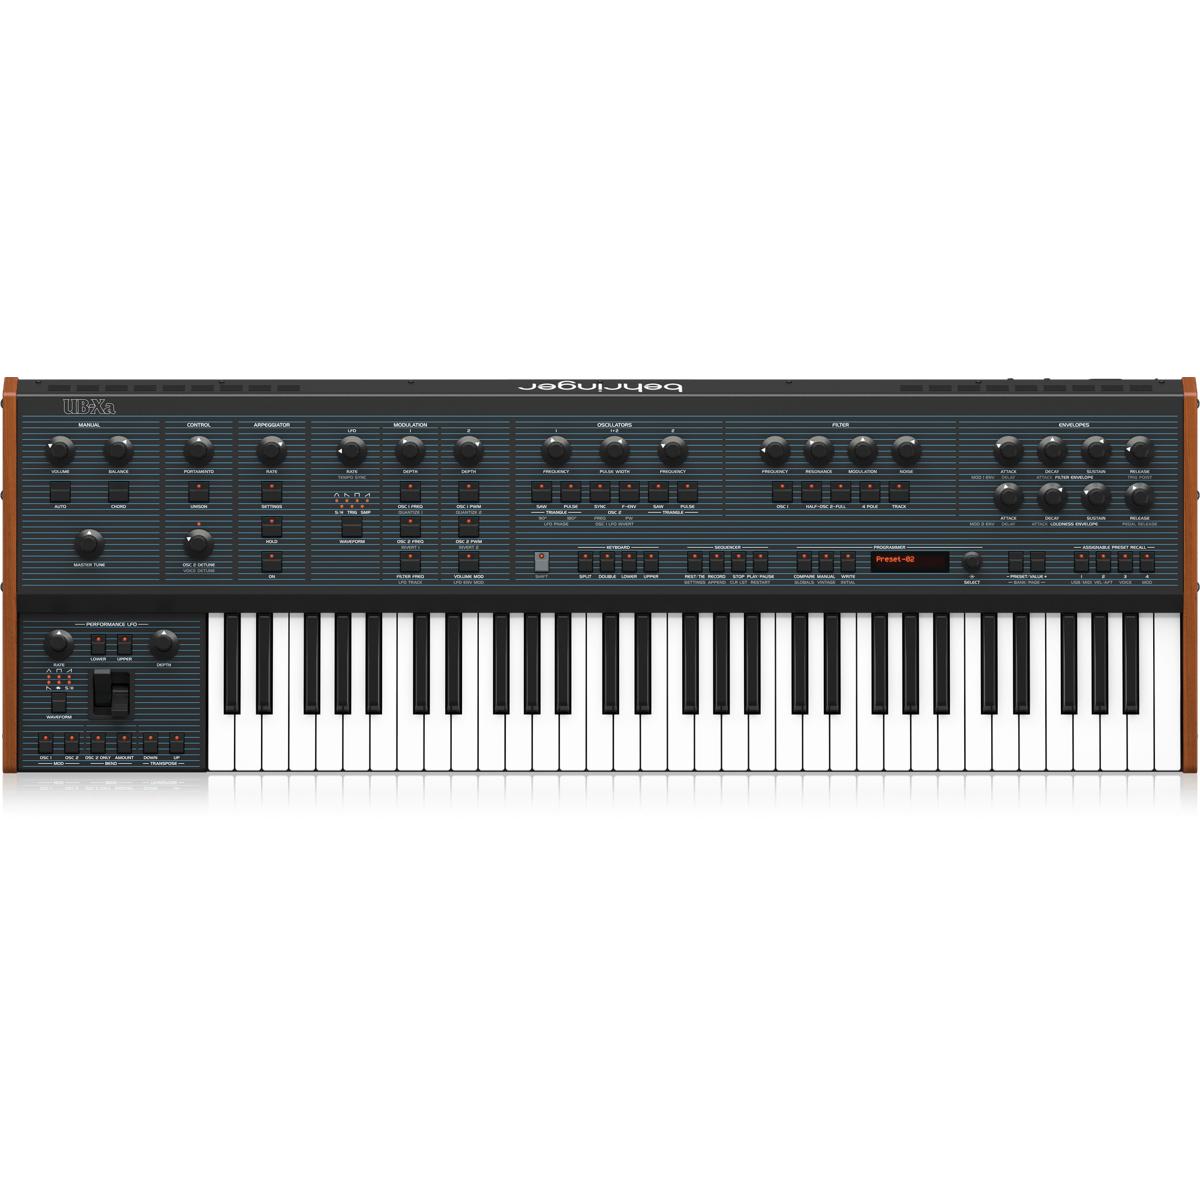 Behringer UB-Xa Multi-Timbral Analog Polyphonic Synth